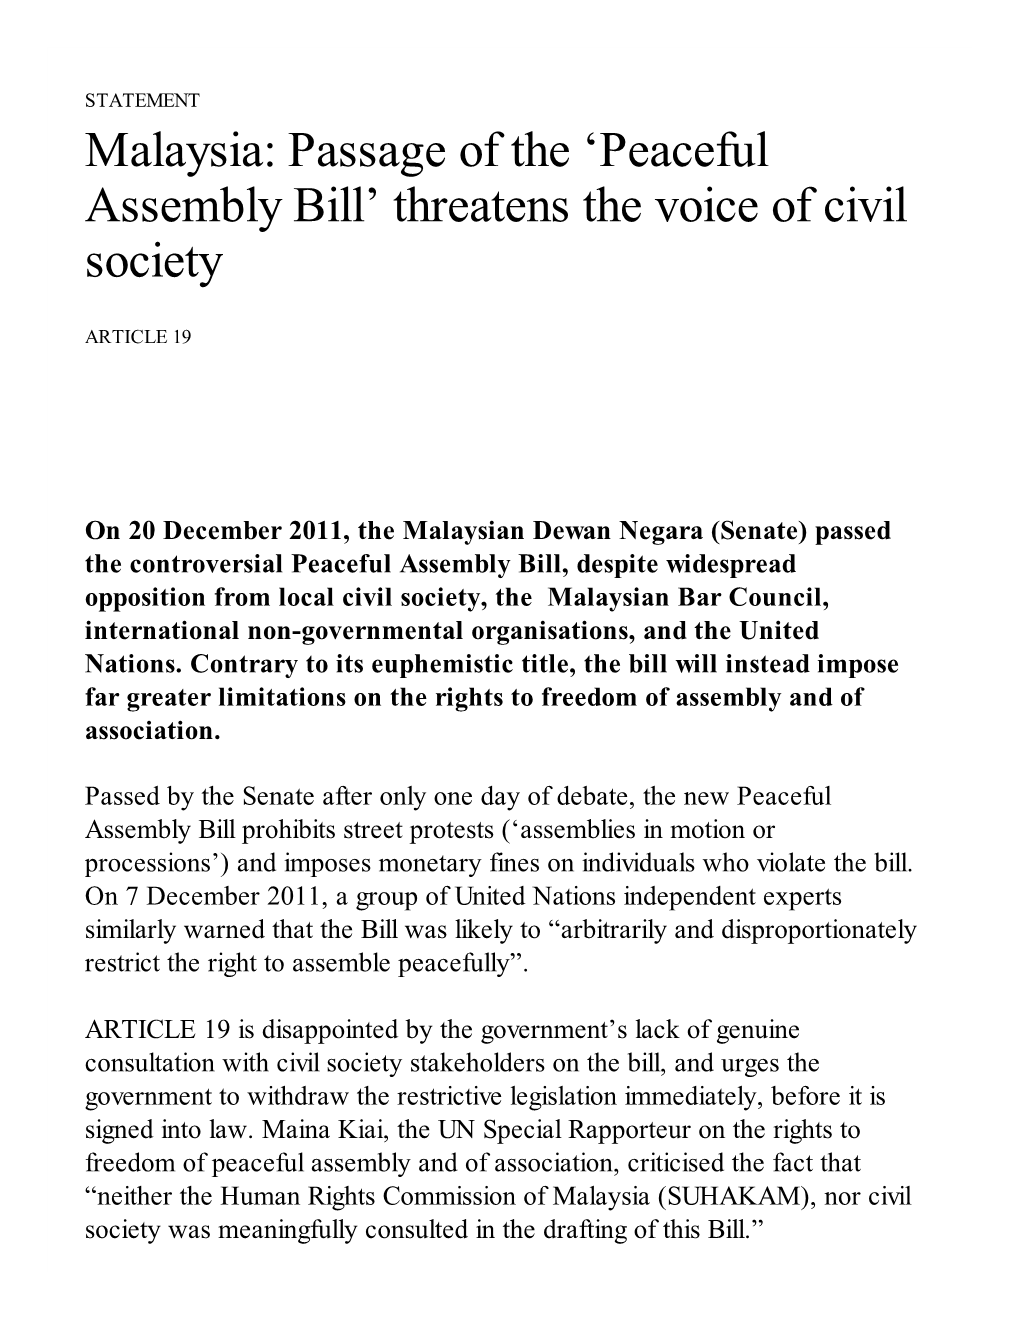 Malaysia: Passage of the Peaceful Assembly Bill Threatens the Voice Of